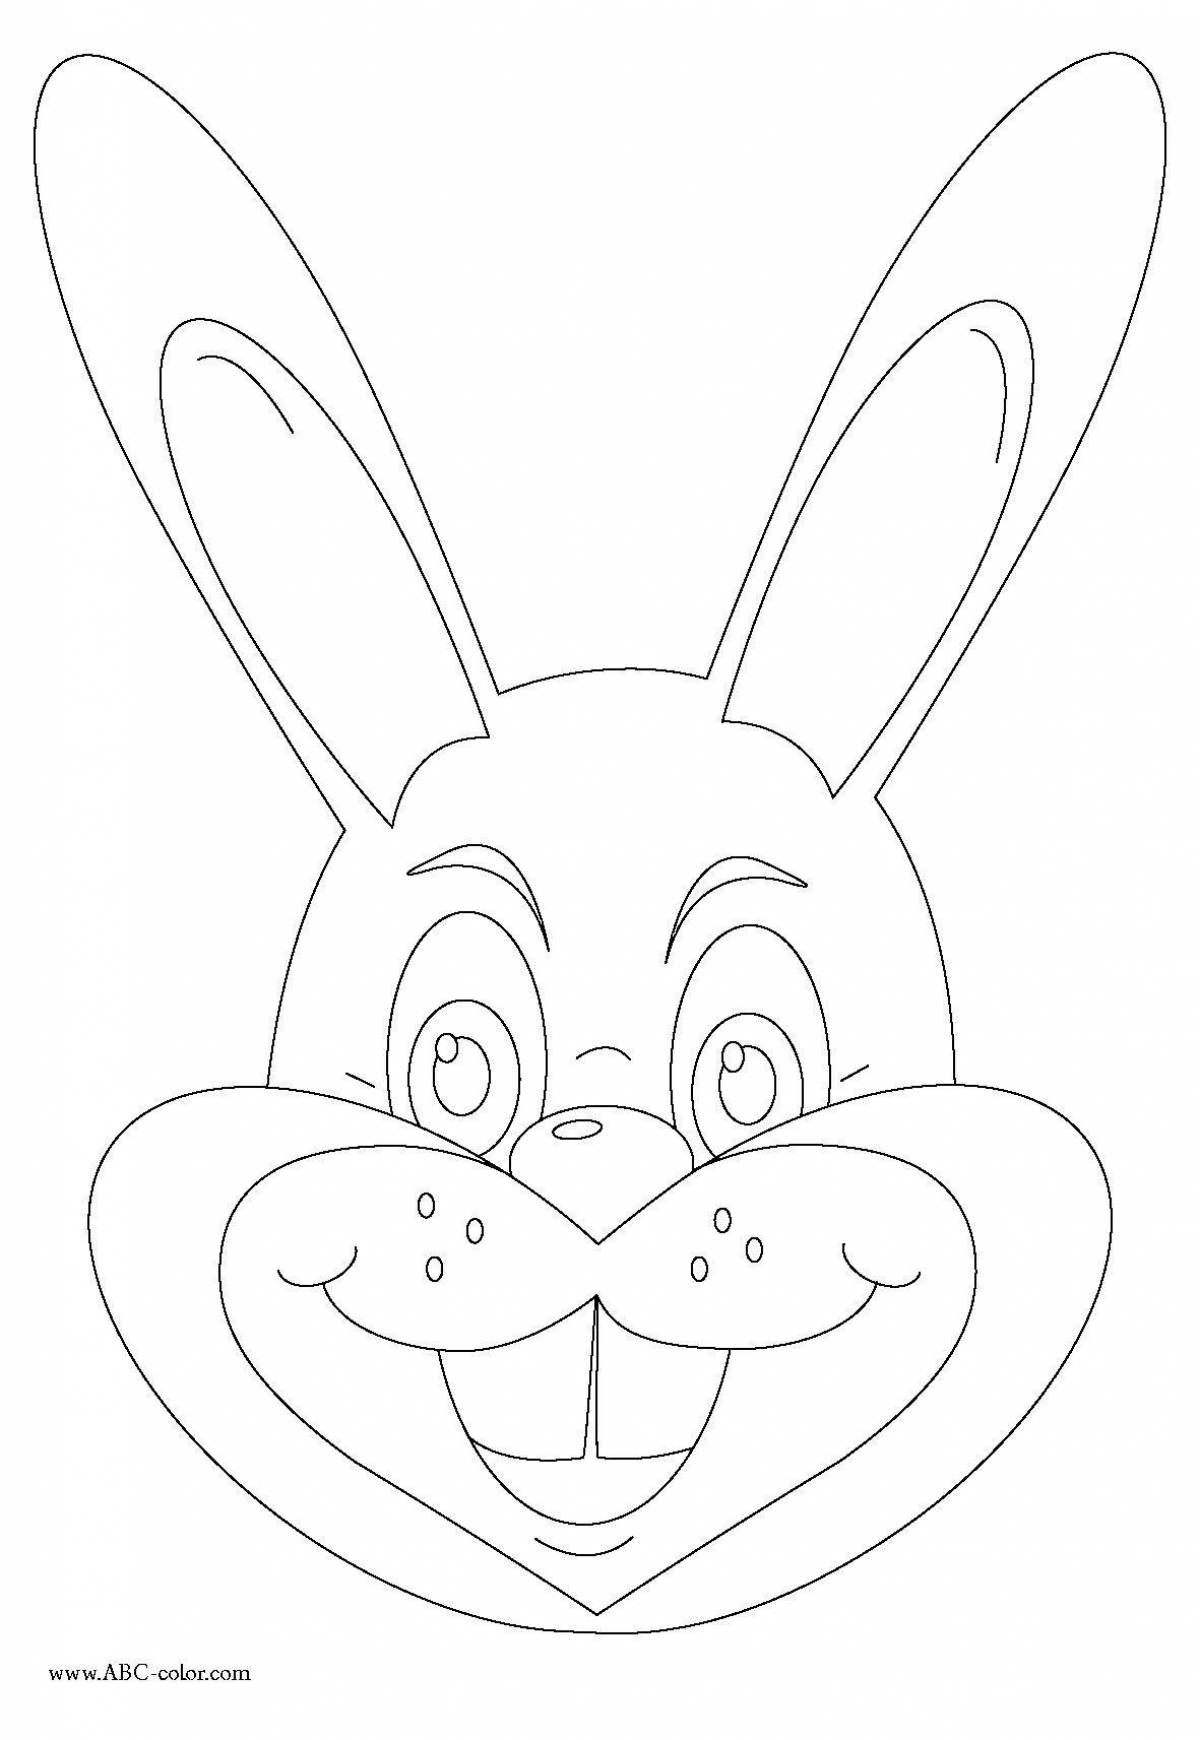 Coloring book nice muzzle of a hare